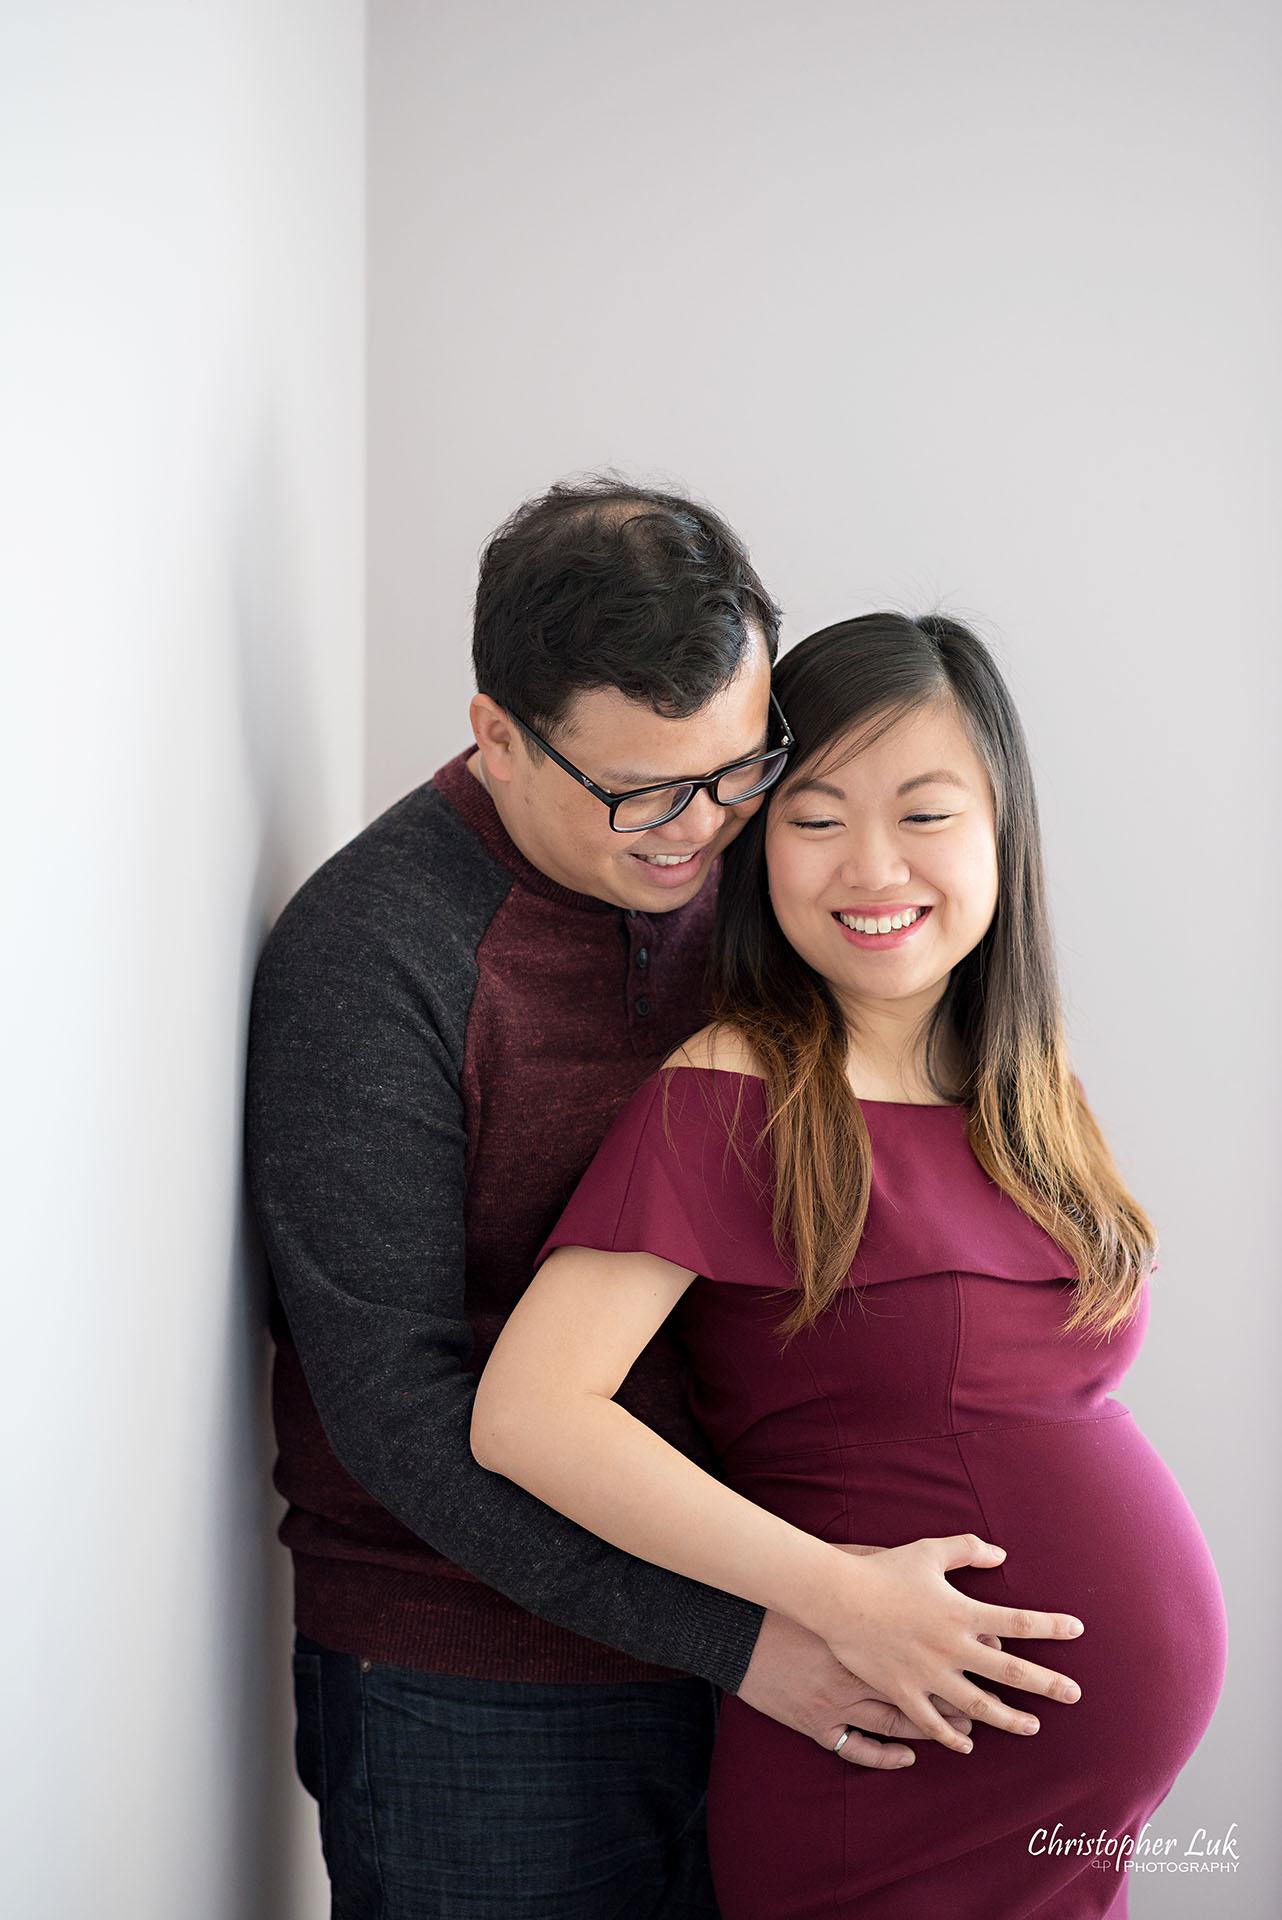 Christopher Luk Toronto Wedding Family Maternity Photographer - Markham Richmond Hill Toronto Natural Candid Photojournalistic Mom Dad Husband Wife Baby Bump Baby Pregnant Pregnancy Together Looking Down Hug Smile